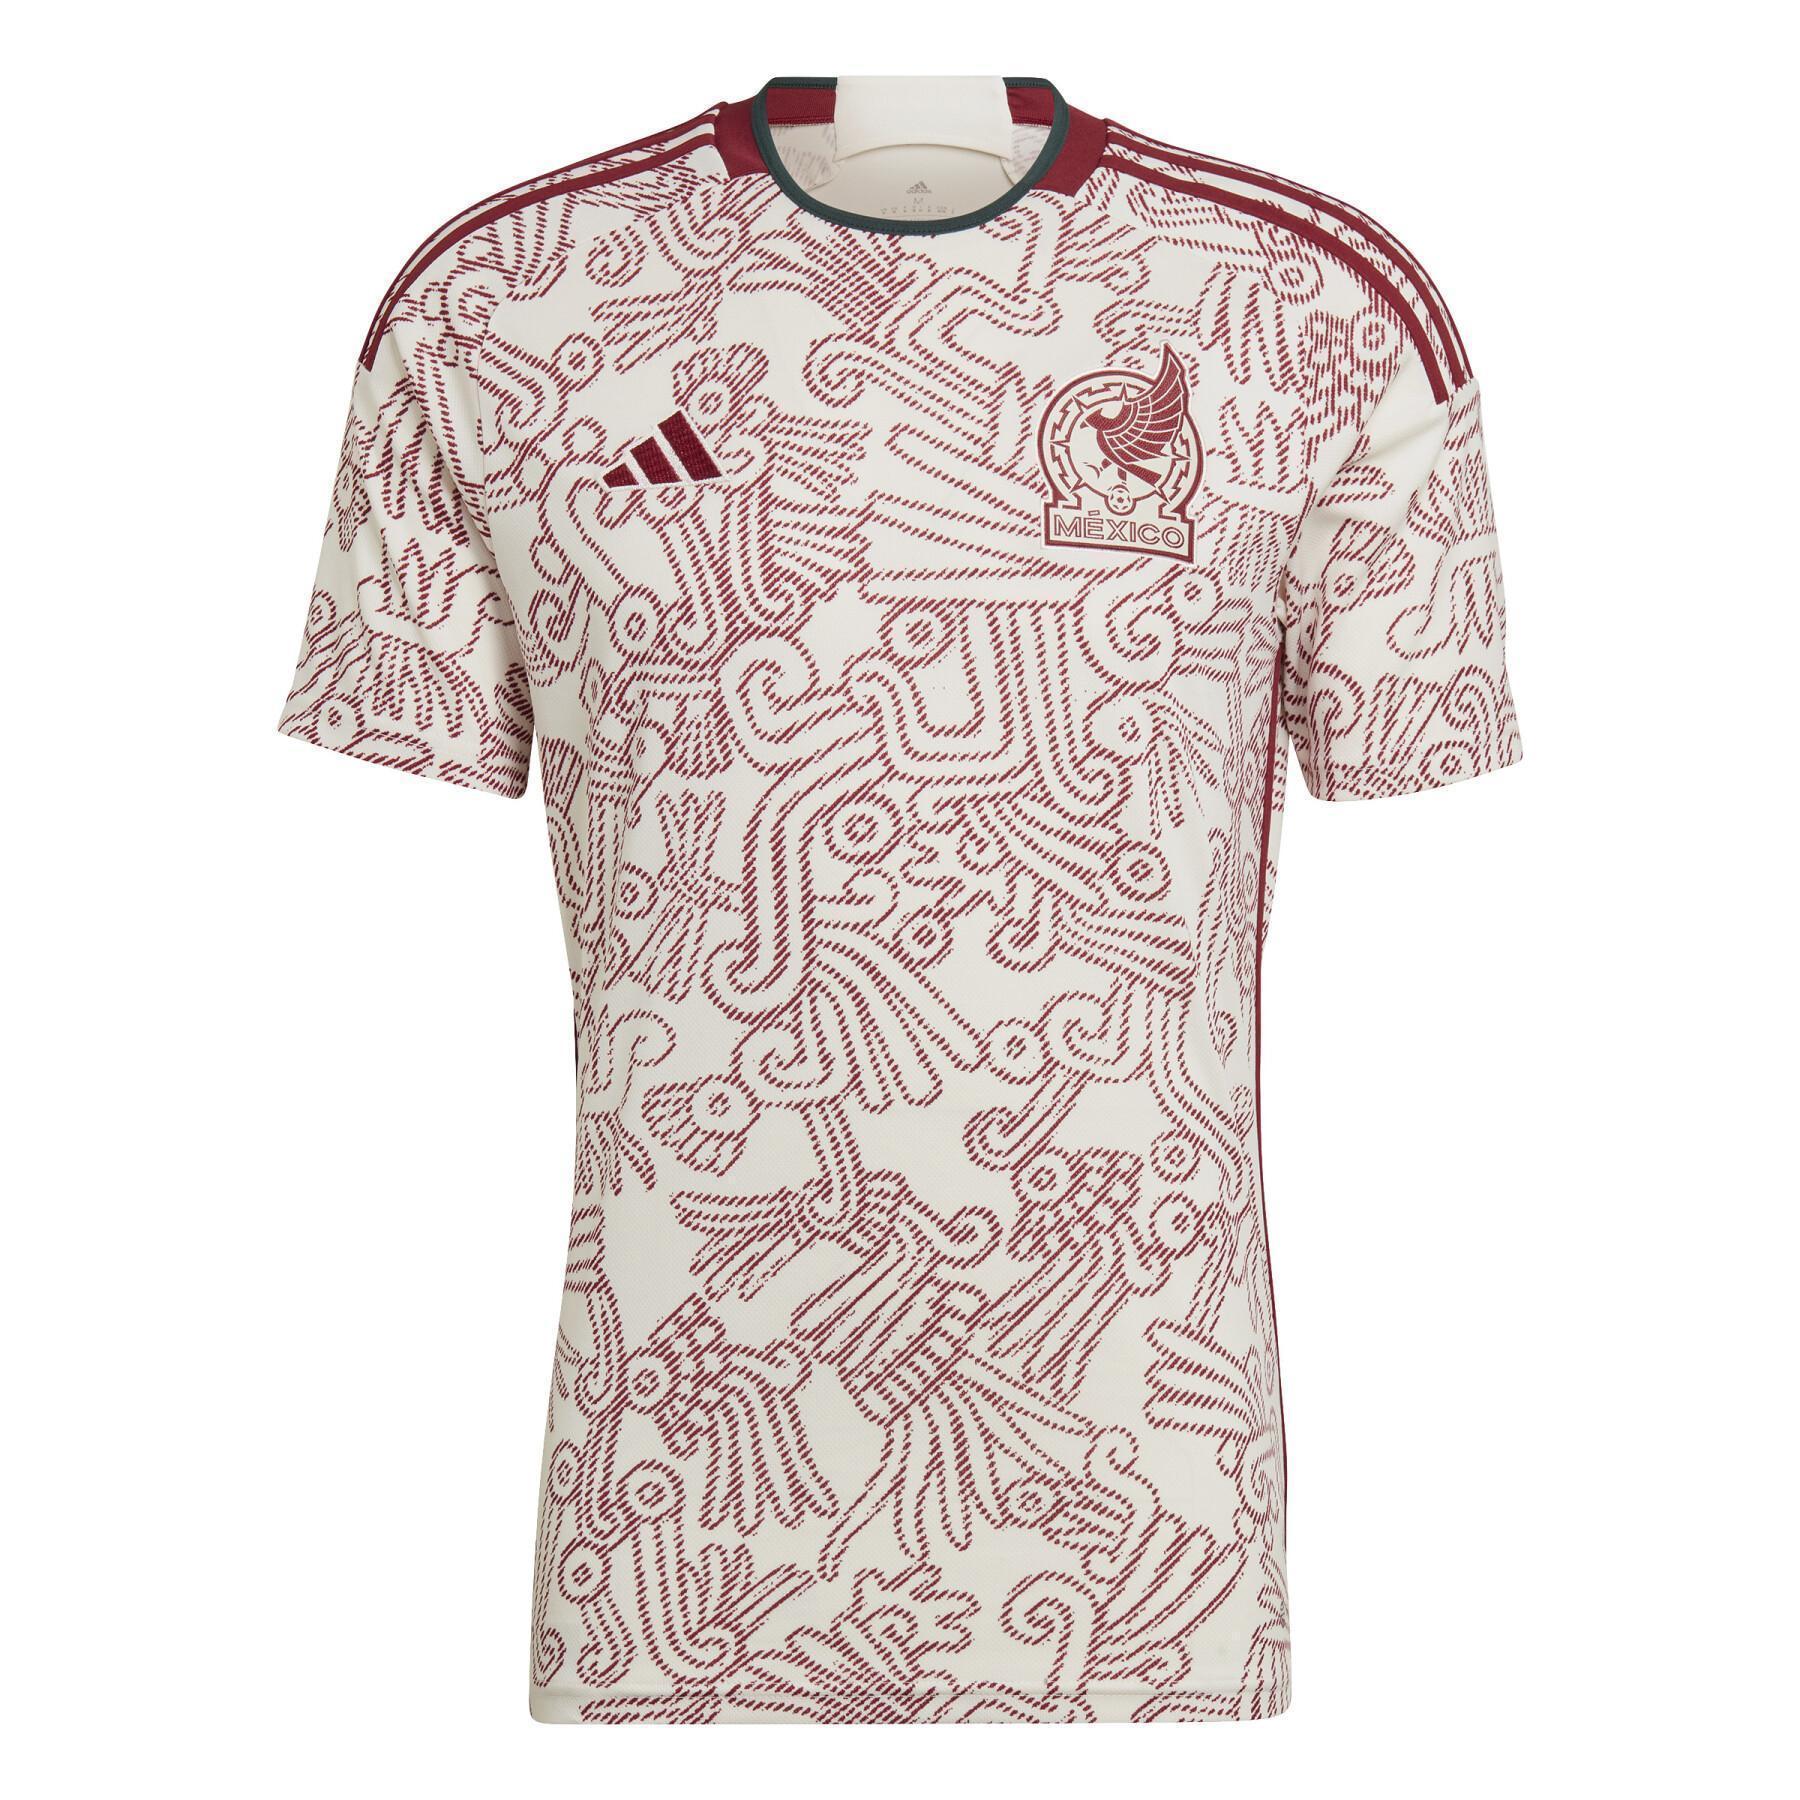 World Cup 2022 outdoor jersey Mexique